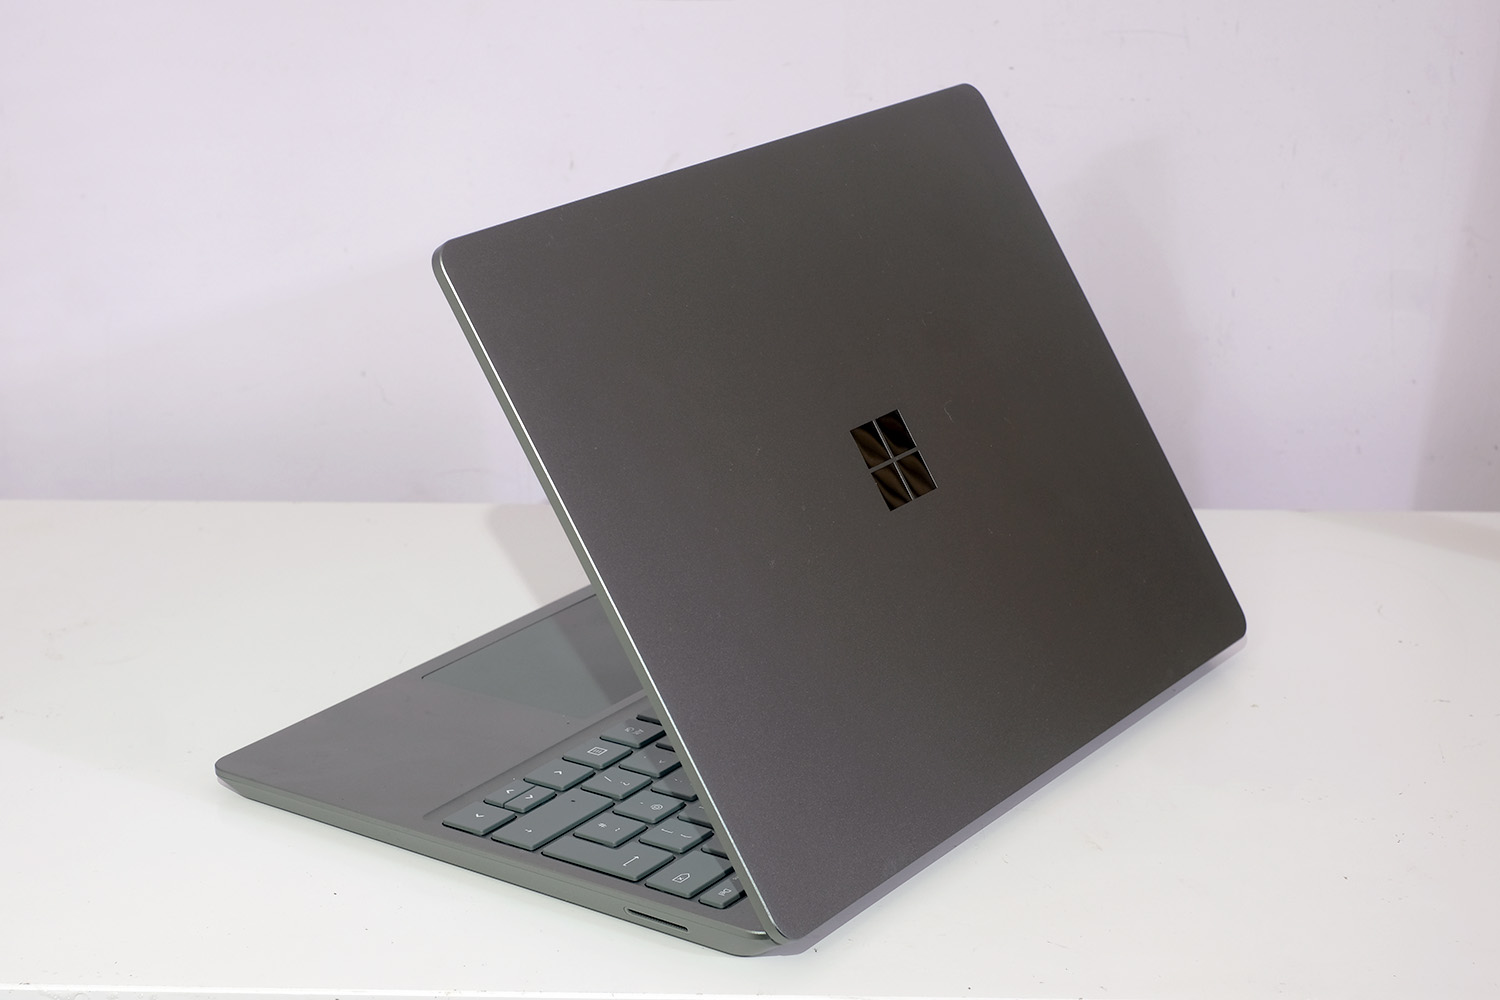 Microsoft Surface Laptop Go 3 hands-on review